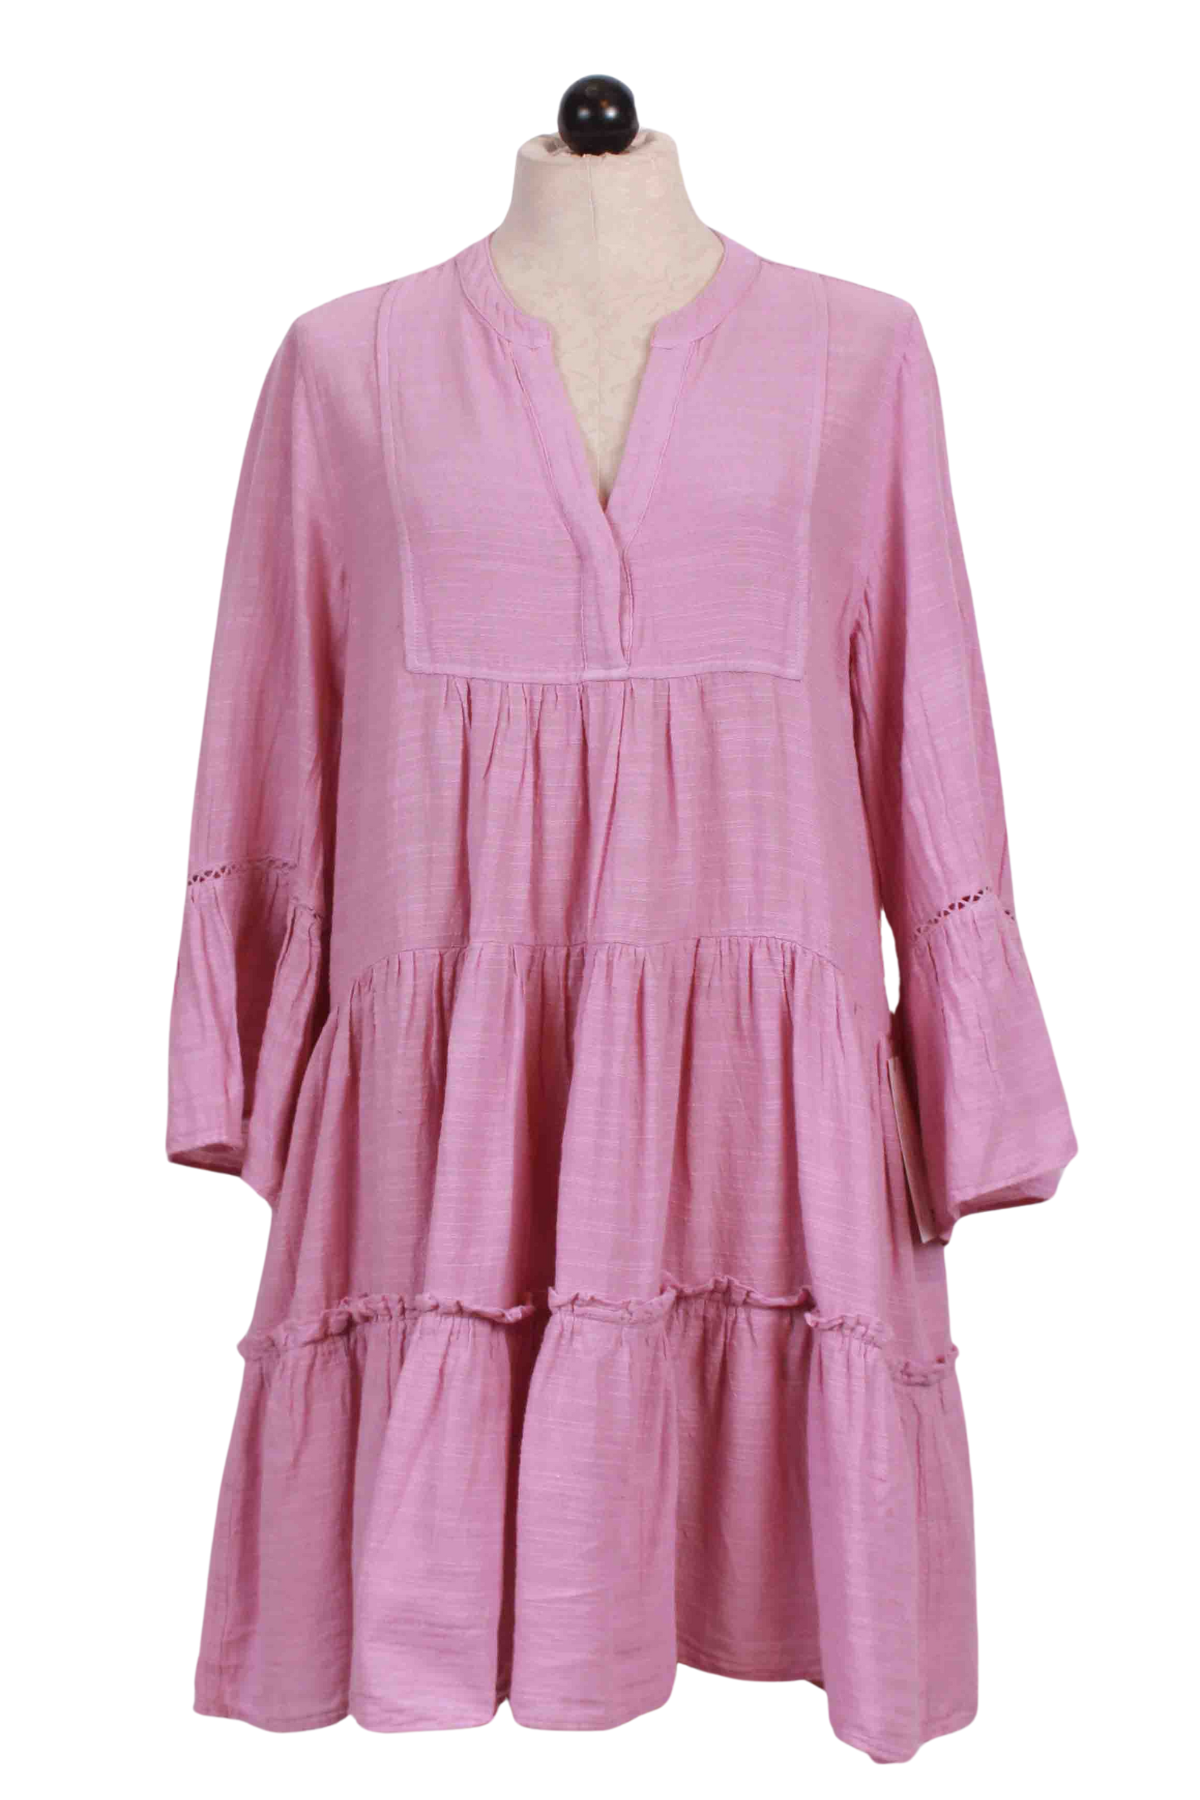 Rose/Lilac Tiered, Bell Sleeve Rose Lilac Gauze Dress by Pearl & Caviar